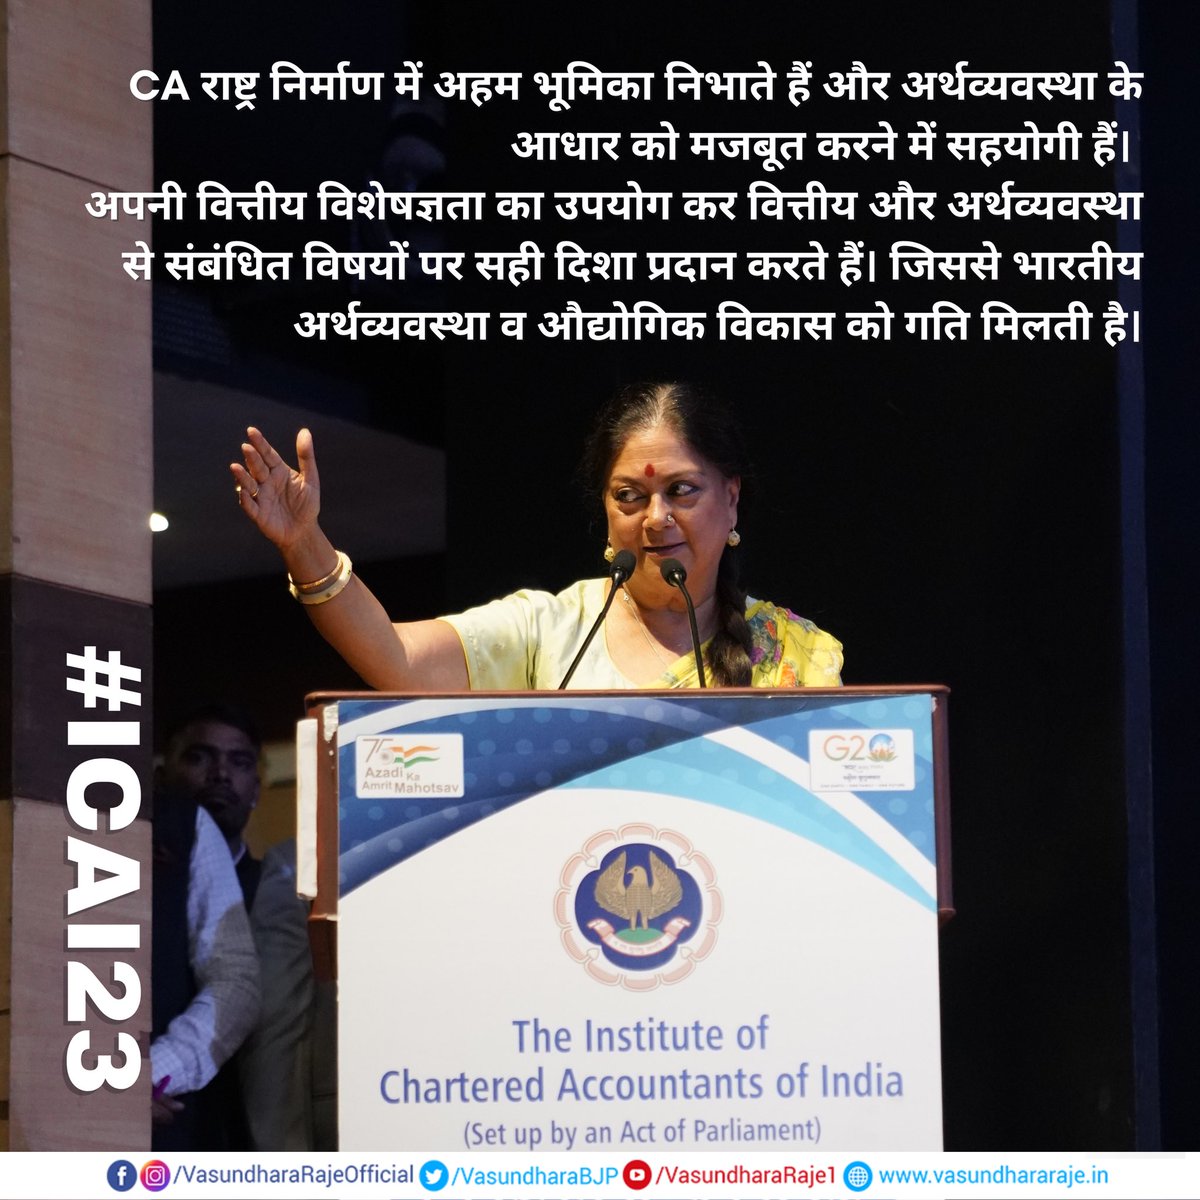 Chartered Accountants play a vital role in nation building and are the backbone of a thriving economy.

#charteredaccountants #RisingRajasthan #ICAI